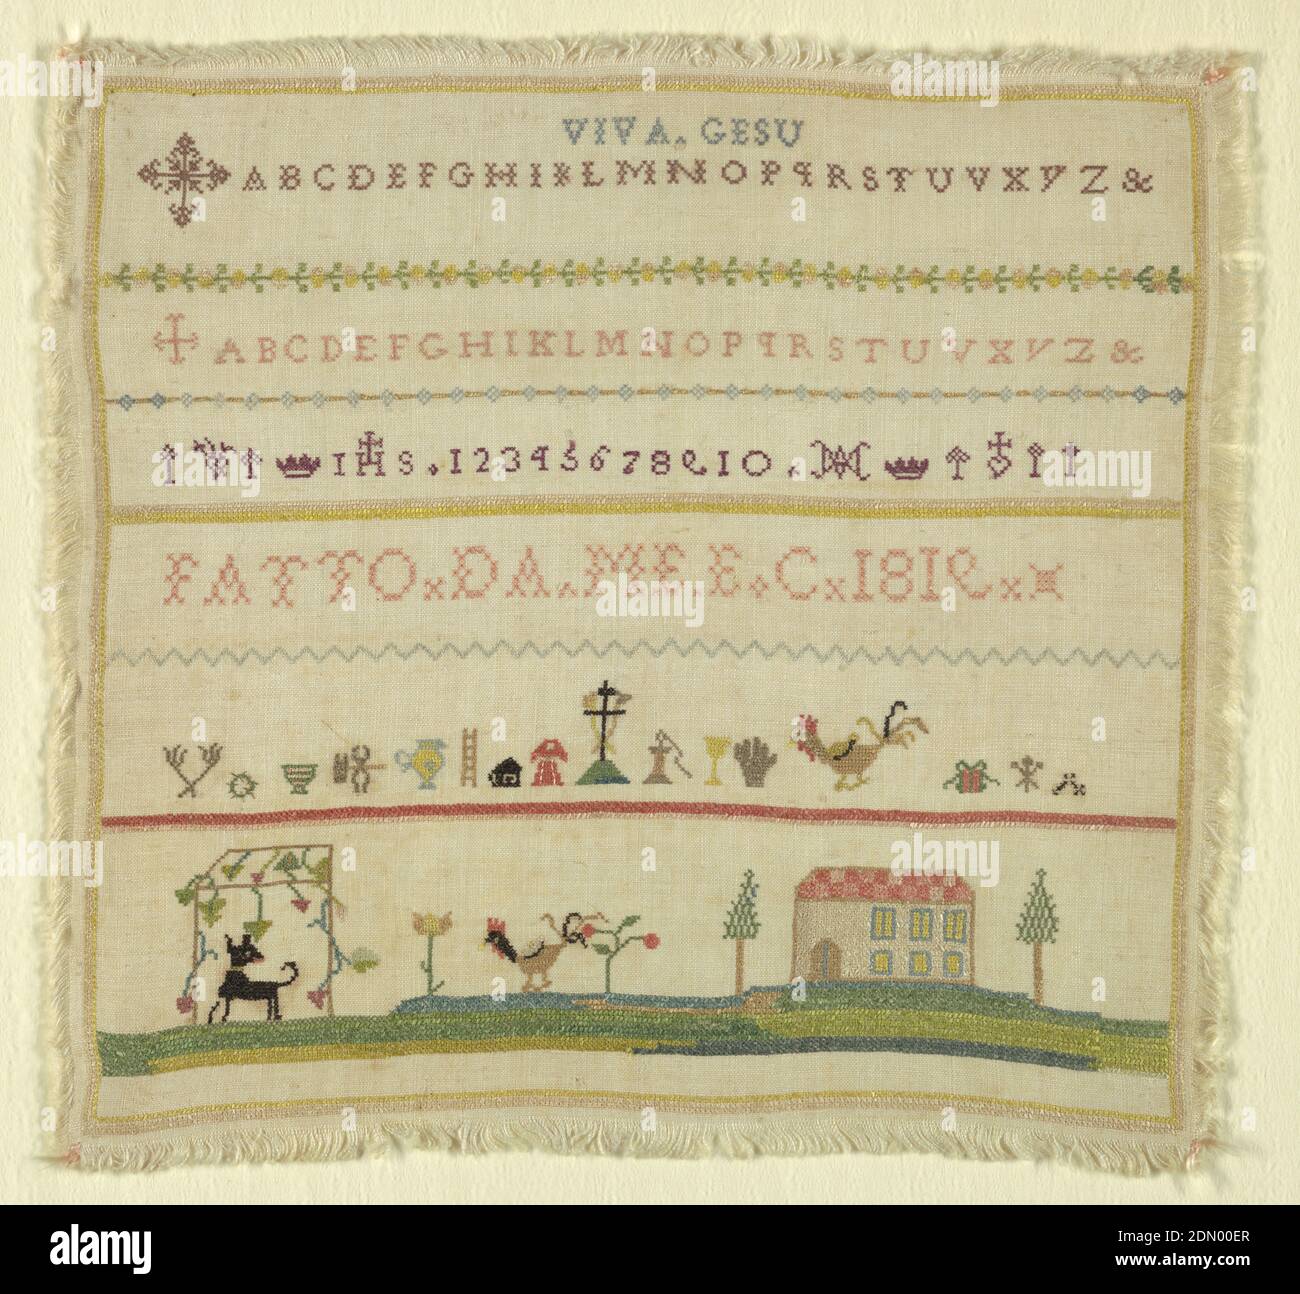 Sampler, Medium: silk embroidery on linen foundation Technique: embroidered in cross and eyelet stitches on plain weave foundation, Bands of two alphabets introduced by Maltese crosses, signature, symbols of the passion and landscape., Italy, 1819, embroidery & stitching, Sampler Stock Photo